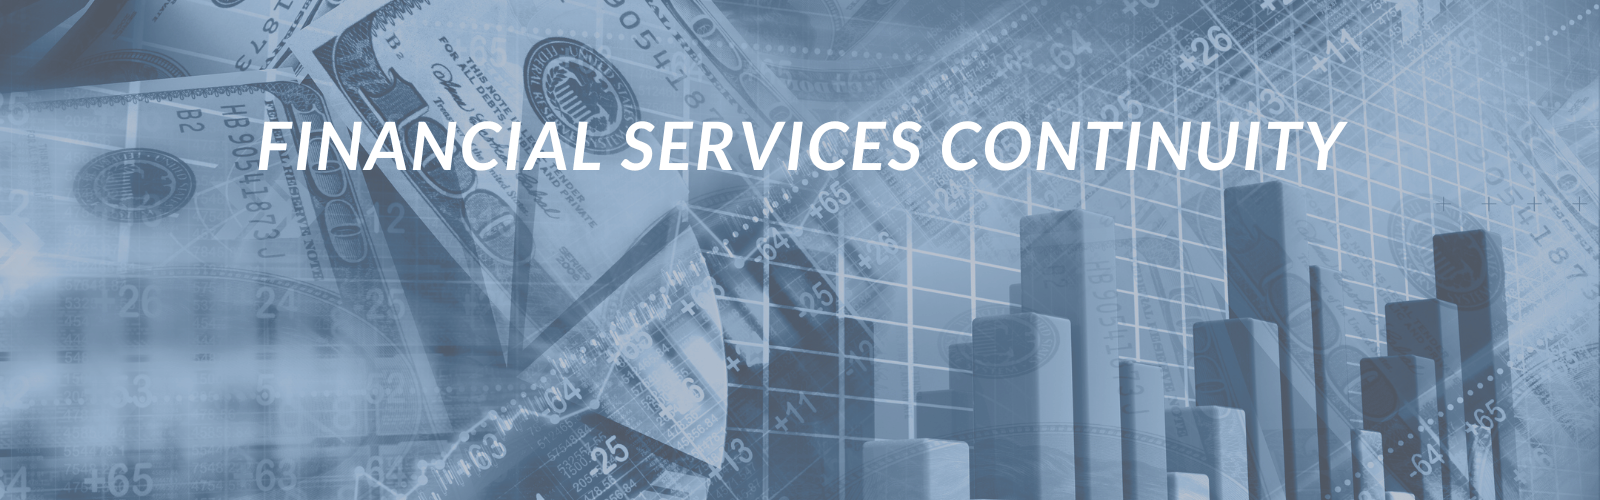 Financial Services Continuity